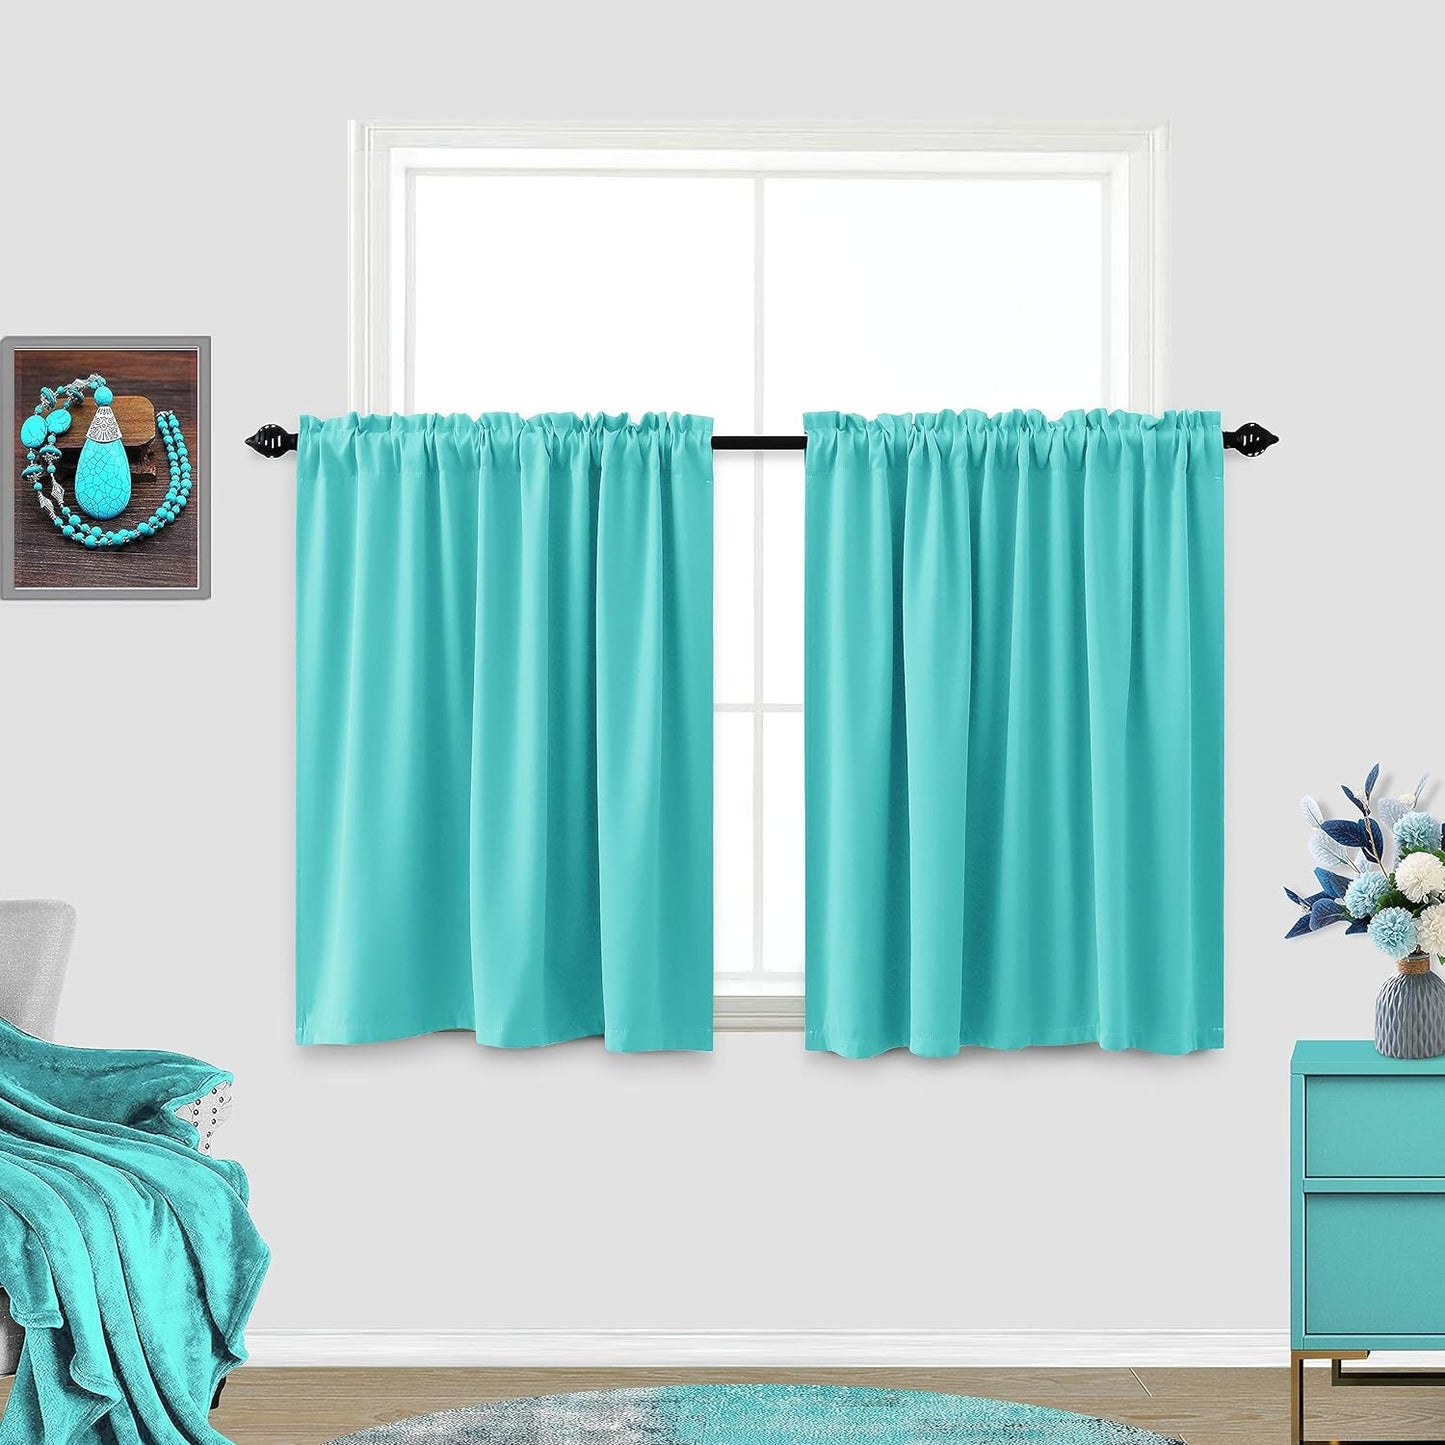 KOUFALL Sage Green Curtains 24 Inch Length for Bathroom Window 2 Pack Rod Pocket Room Darkening Cafe Curtain Tiers Blackout Light Green Short Curtains for Small Windows 34 by 24 in Long  KOUFALL TEXTILE Turquoise 34X24 